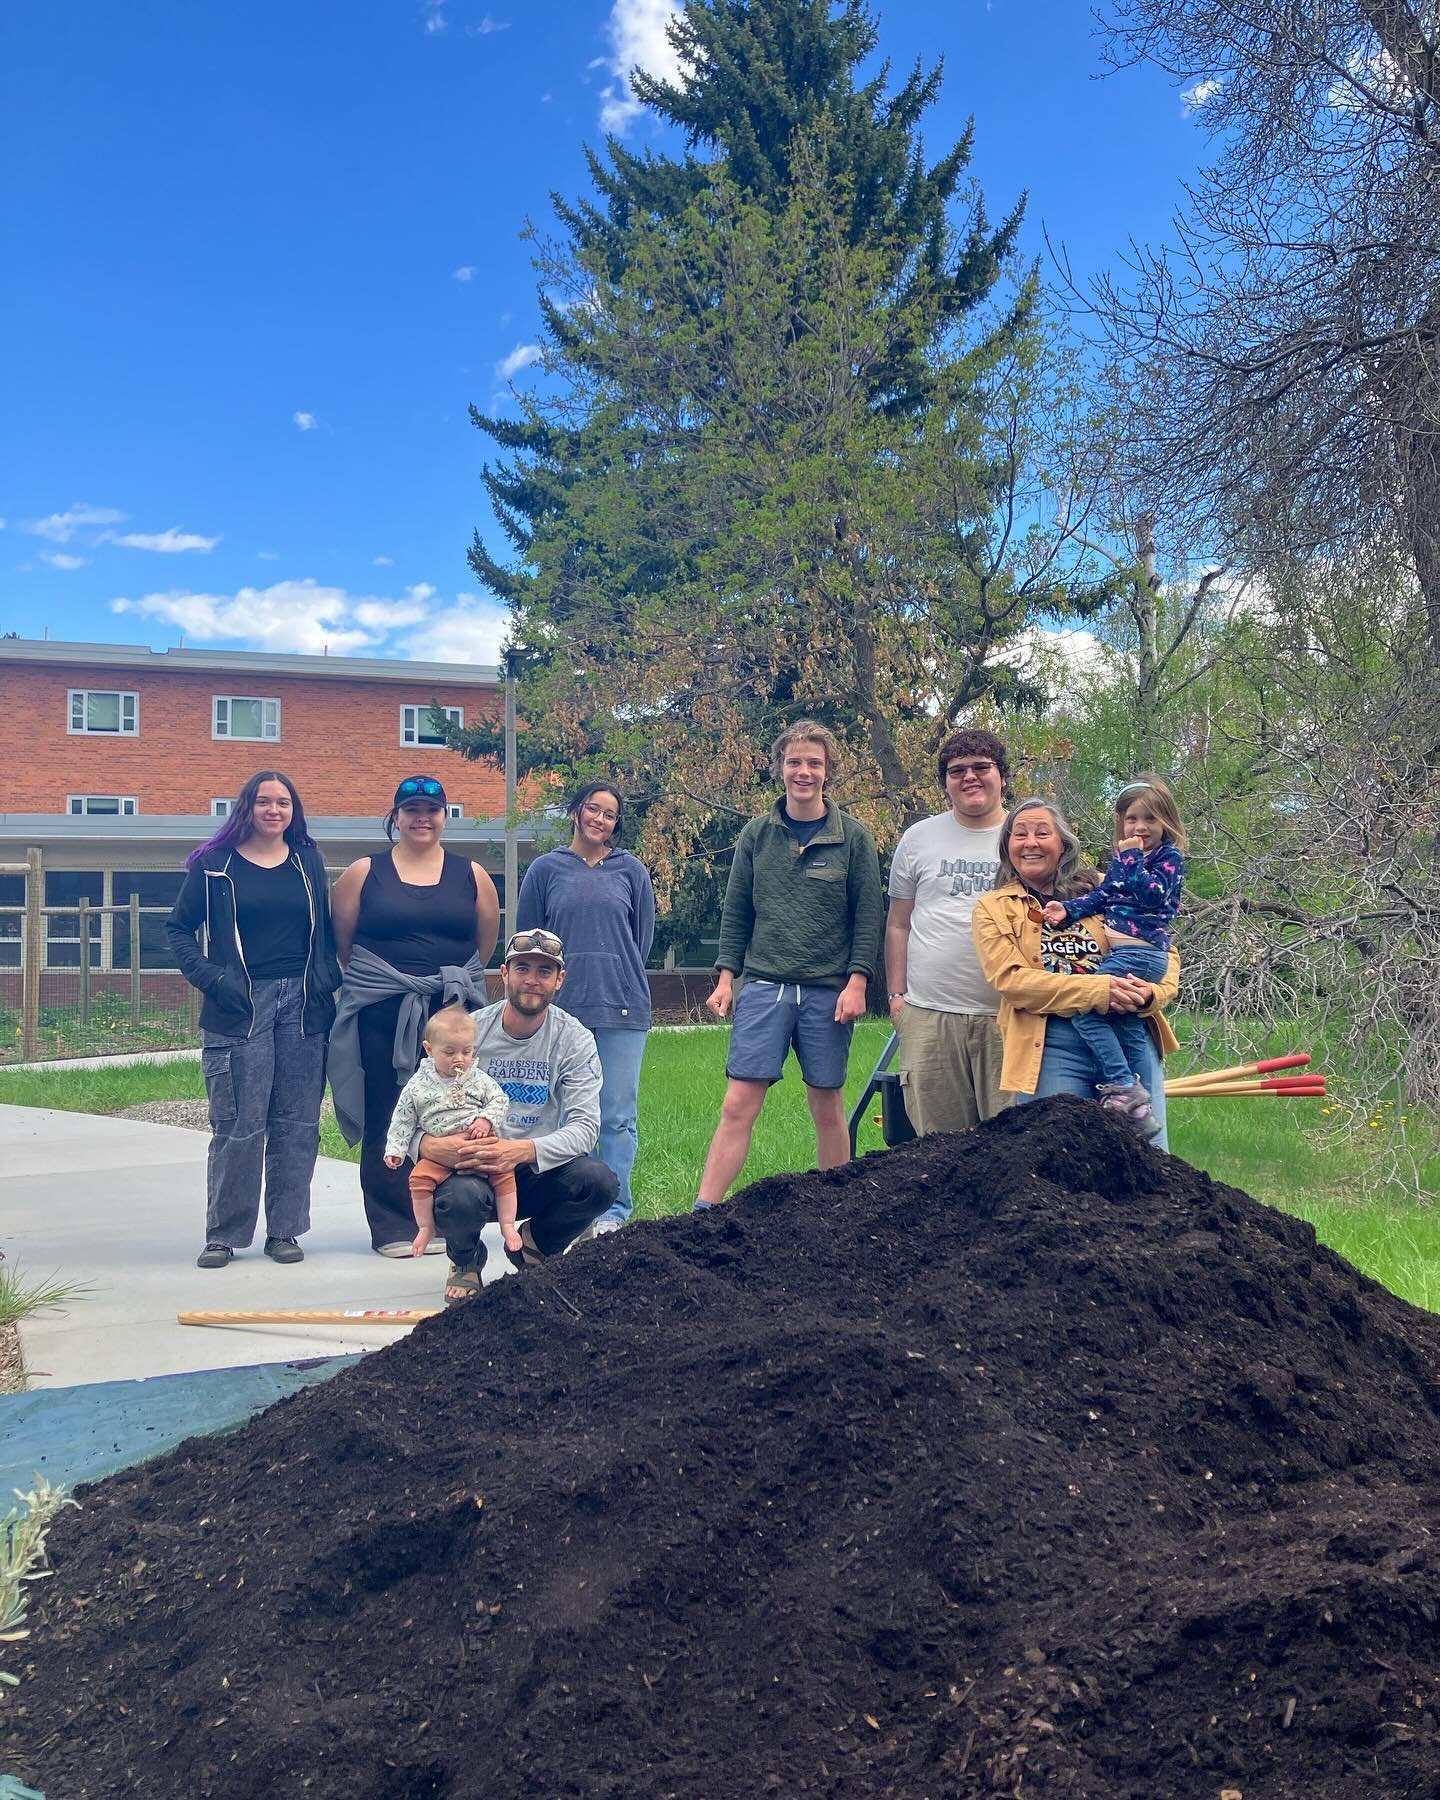 Thank you to the @buffalonationsmsu for working us to #closetheloop by purchasing compost for their Indigenous Food System gardens located at the @montanastateuniversity Hort Farm, American Indian Hall &amp; Story Mill Community Garden. 

We are grat